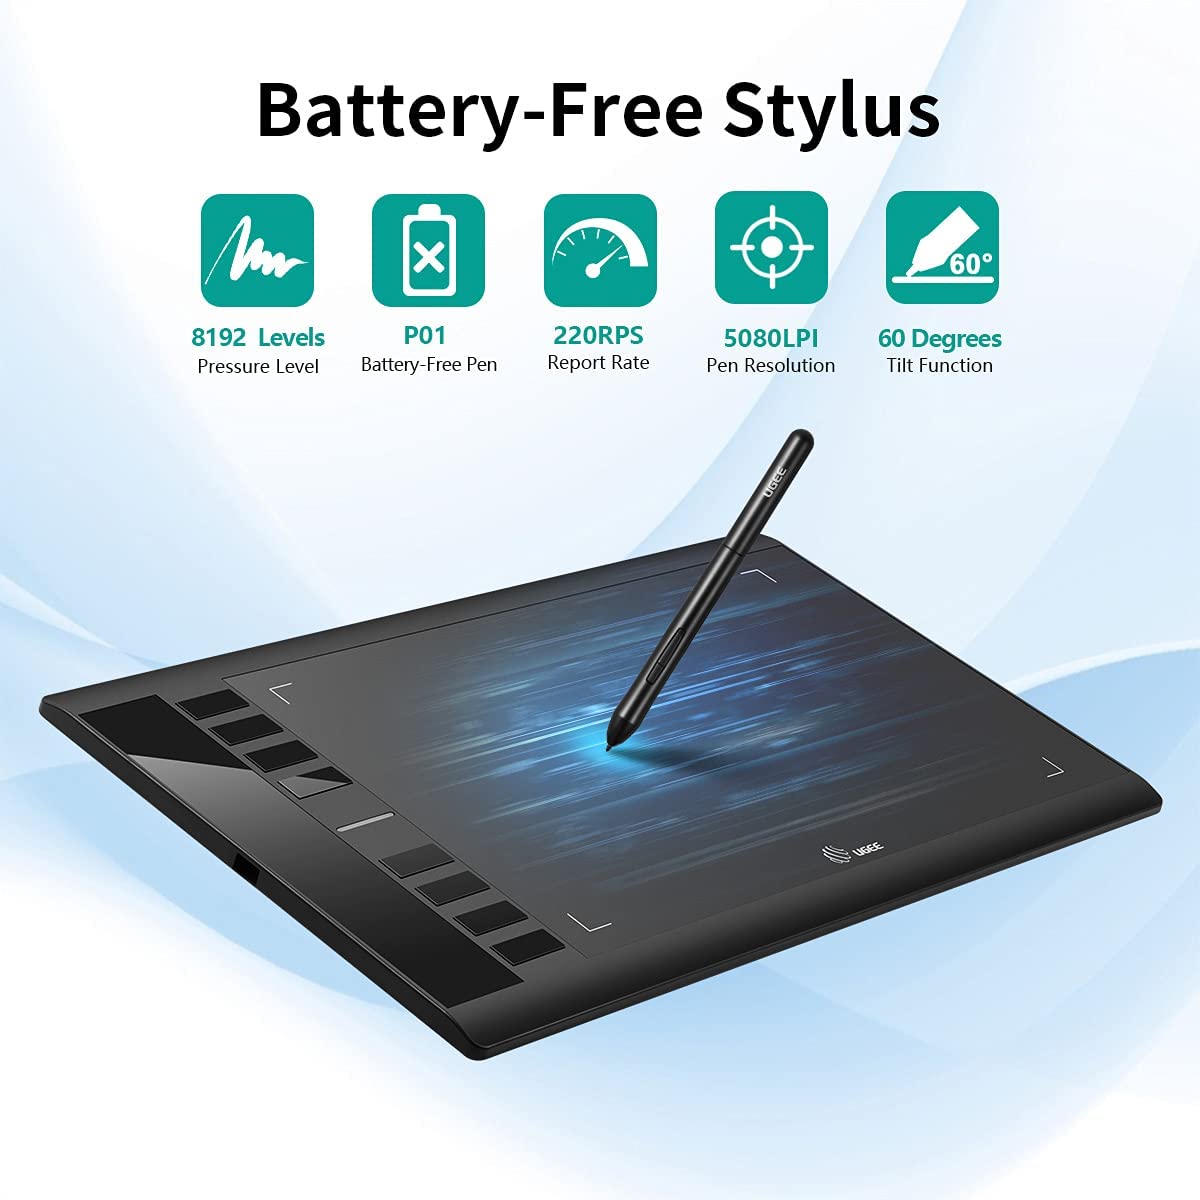 Ugee M708 Graphics Tablet,10 x 6 inch Digital Drawing Tablet with Battery-Free Stylus